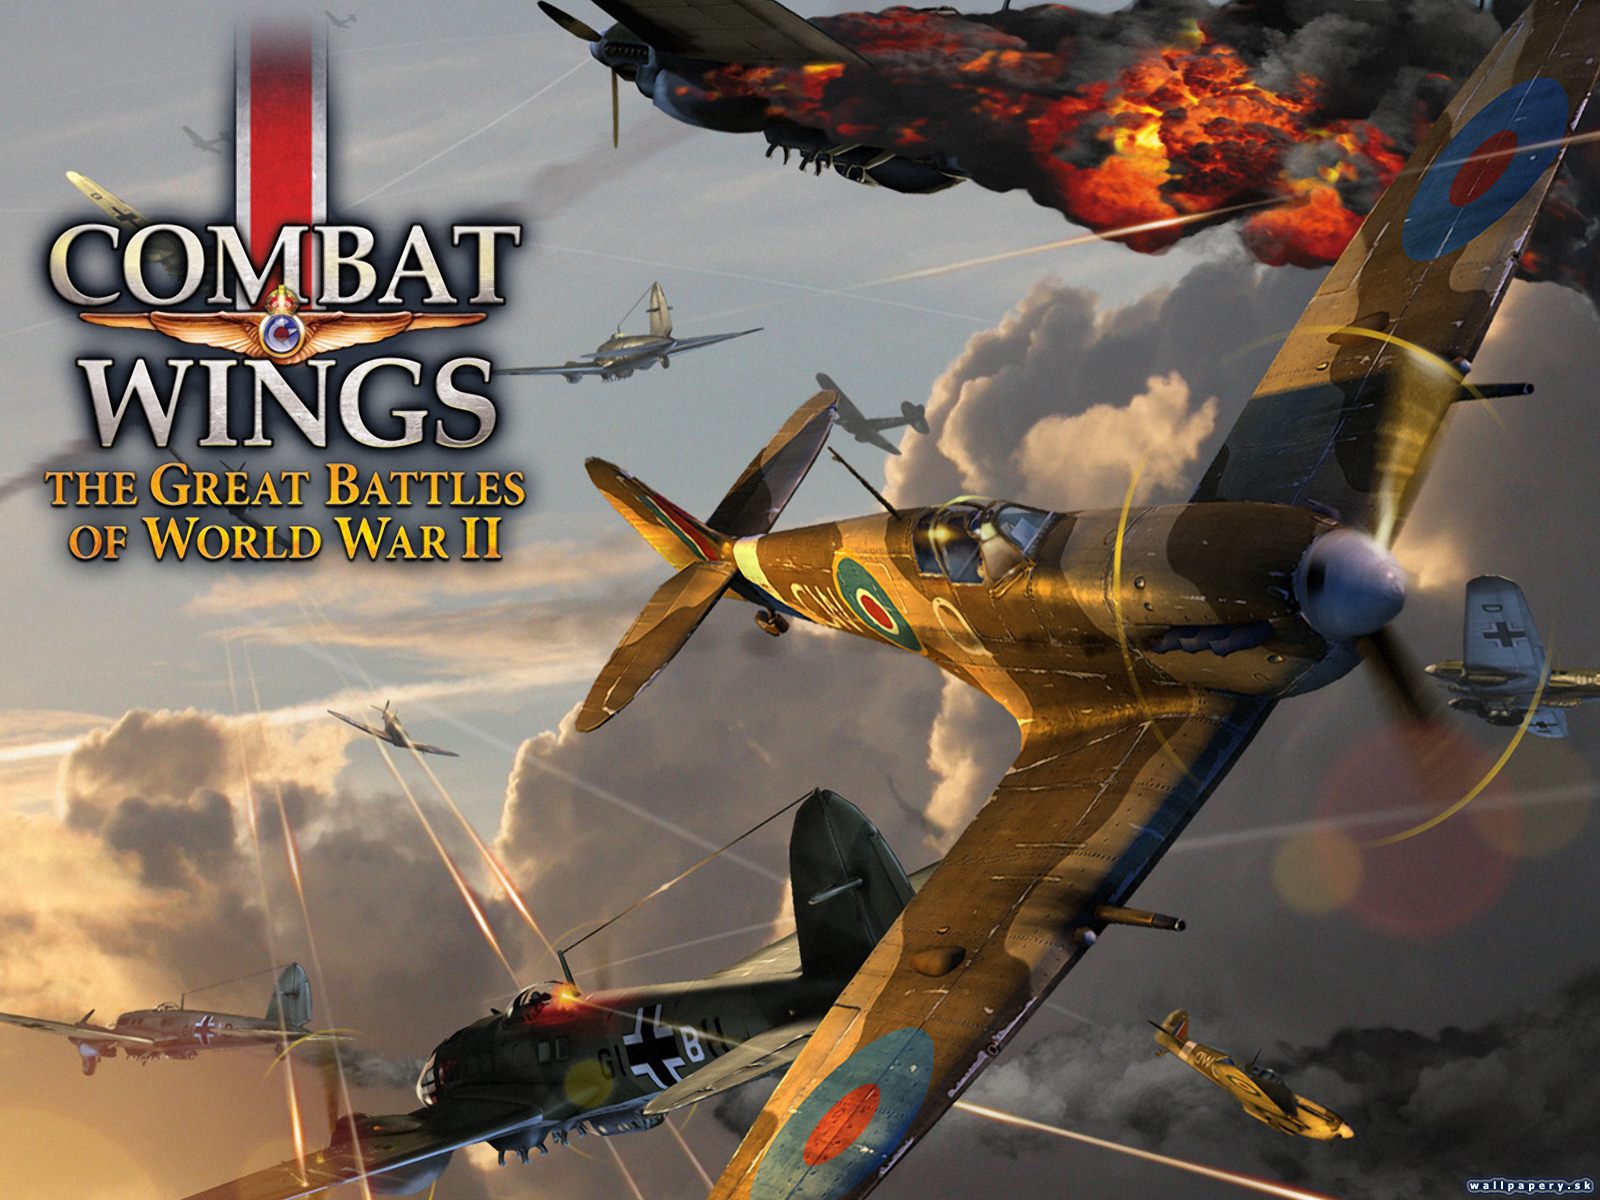 Combat Wings: The Great Battles of WWII - wallpaper 7